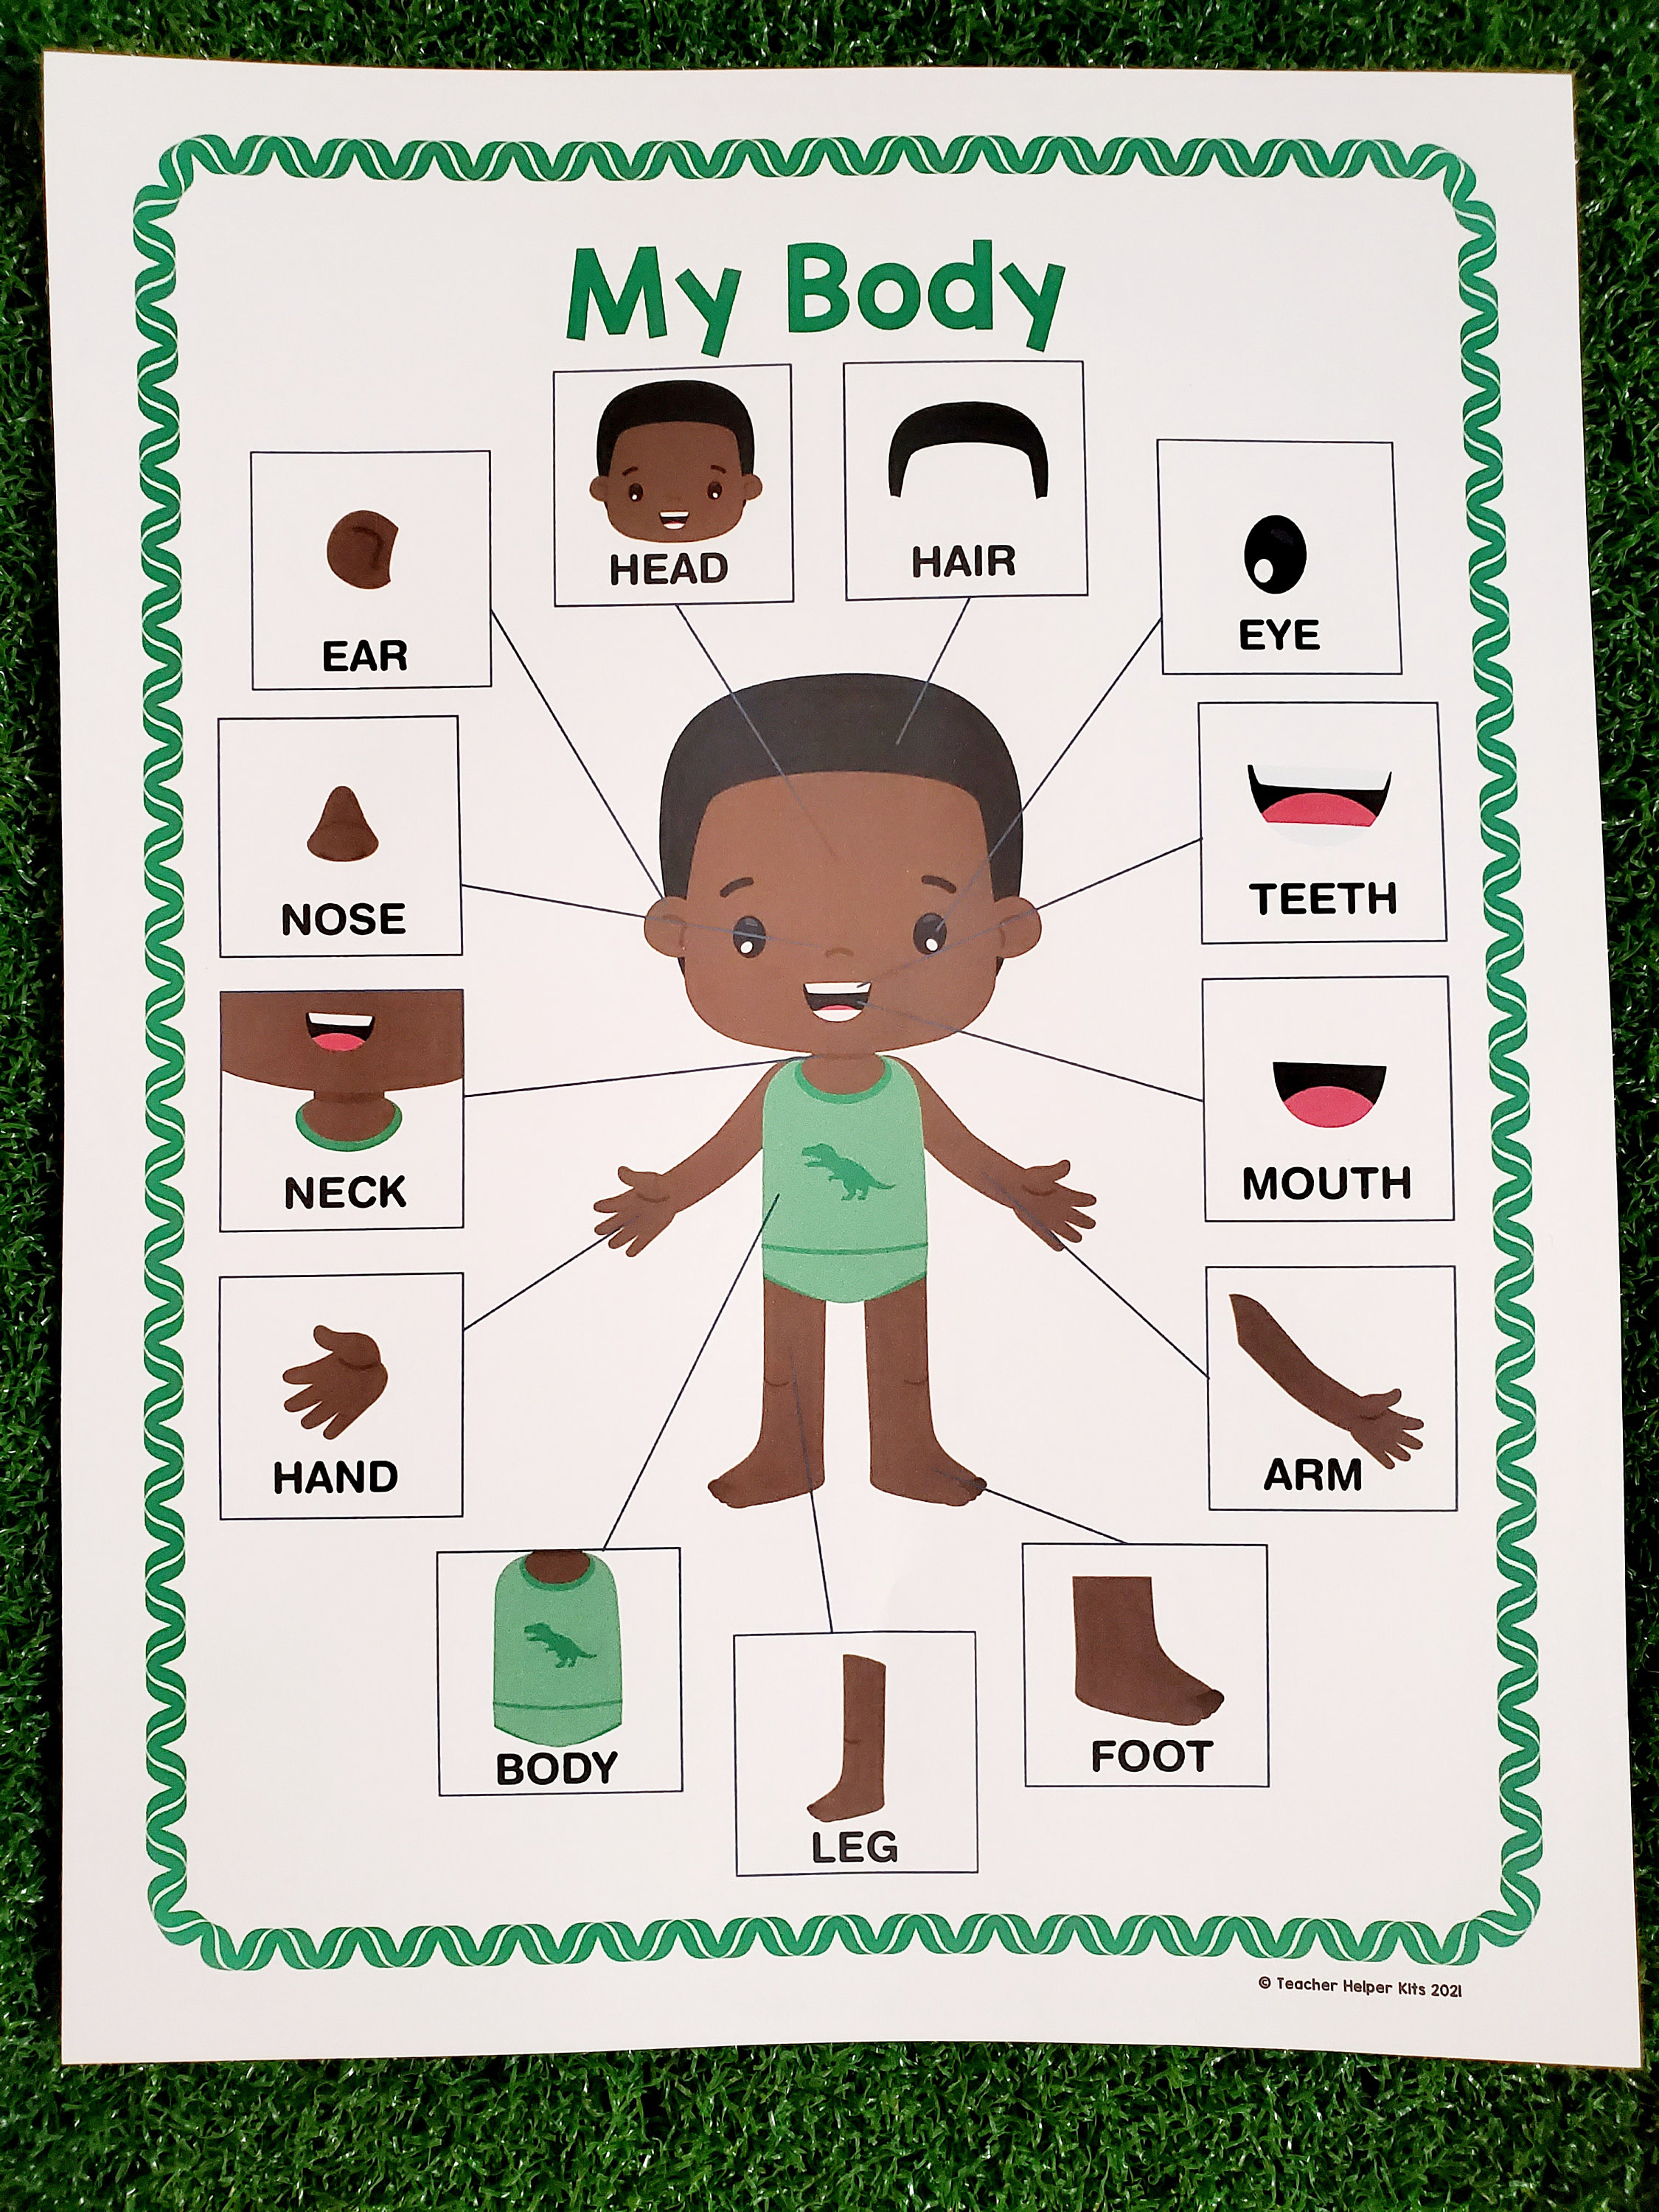 My Body Parts Poster Human Body Parts All About My Body | Etsy